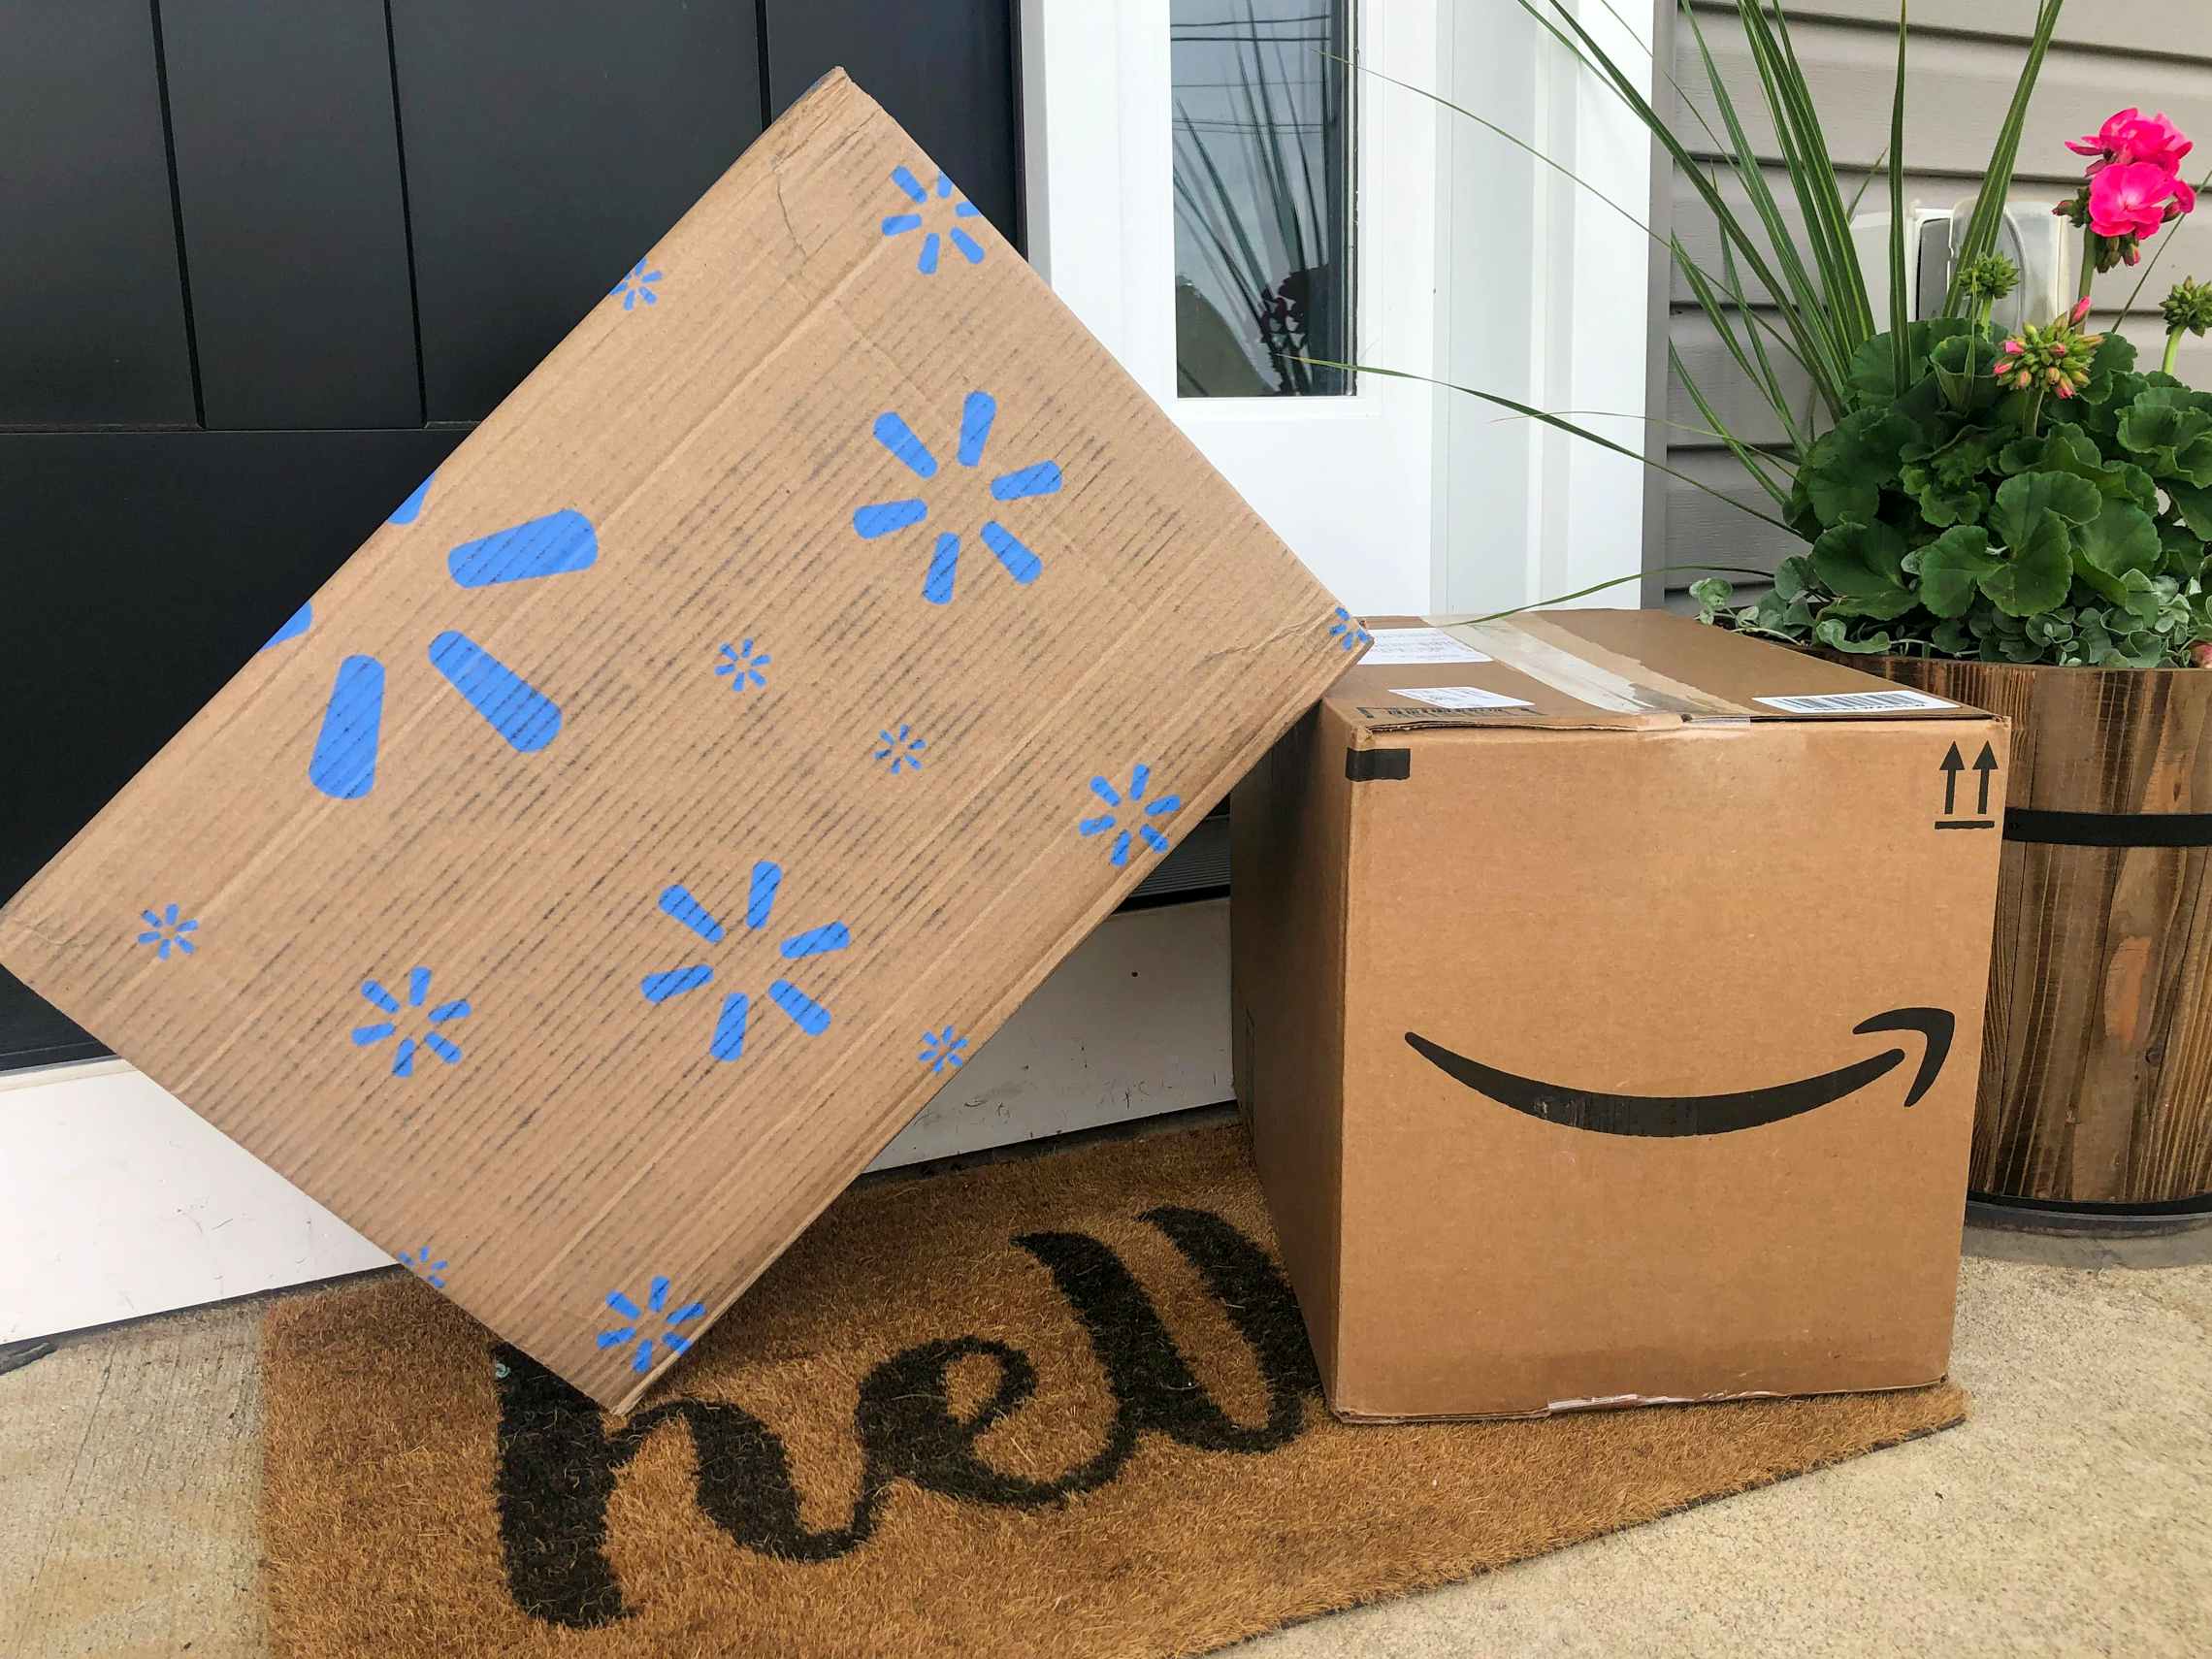 An Amazon and Walmart delivery box sitting on a front doorstep.